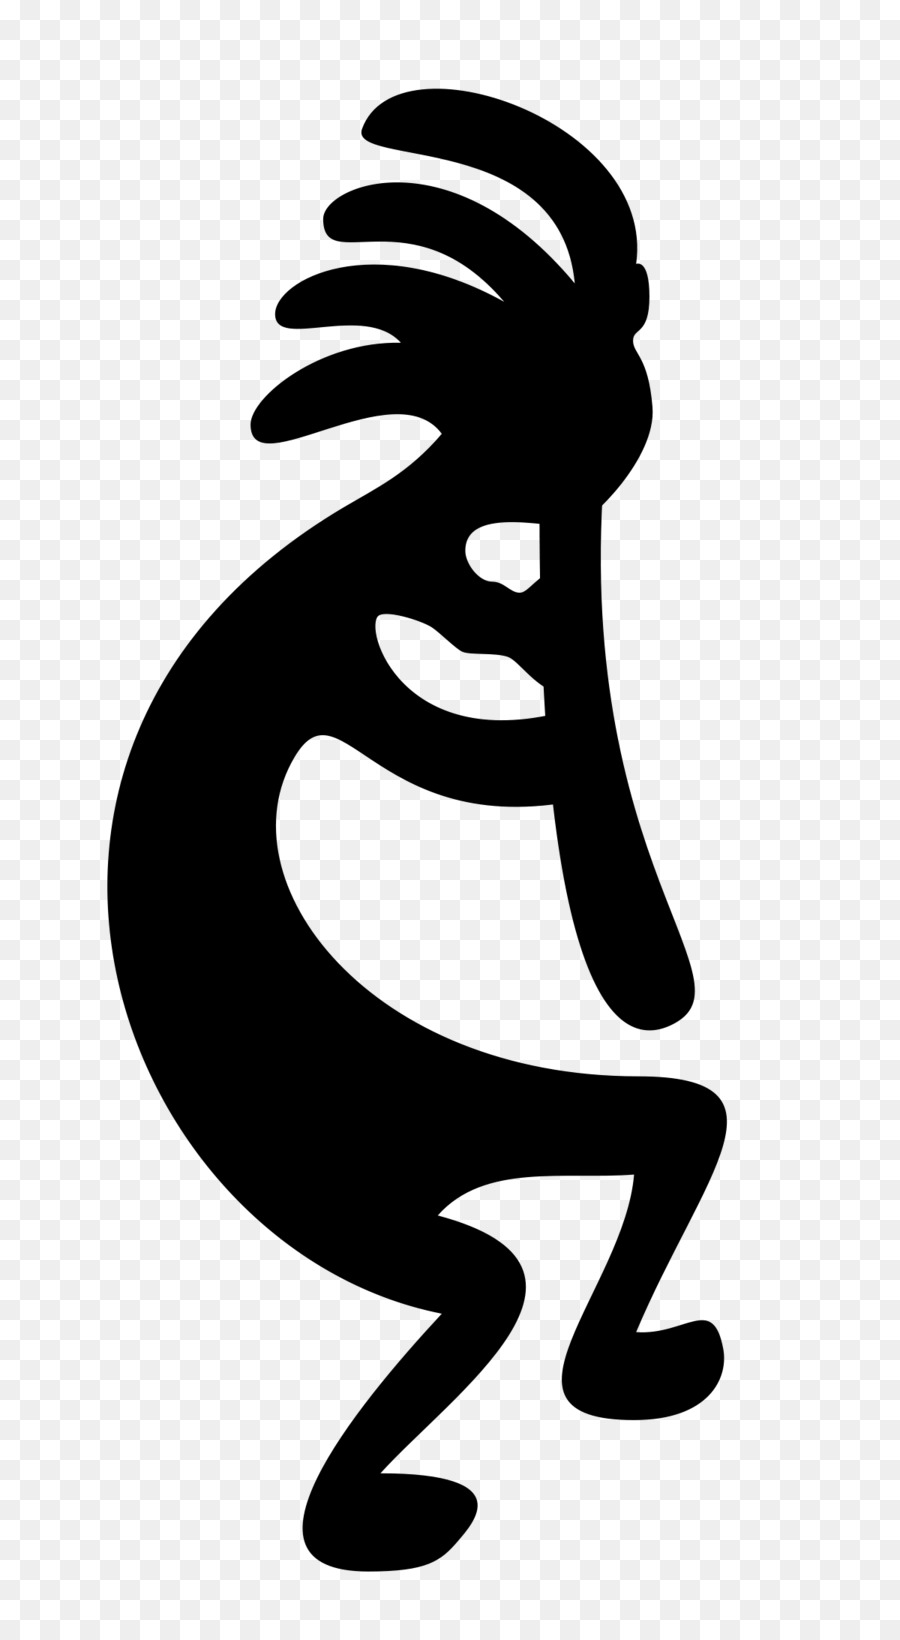 Kokopelli Trail Southwestern United States Native Americans in the United States - Flute png download - 1200*2182 - Free Transparent  png Download.